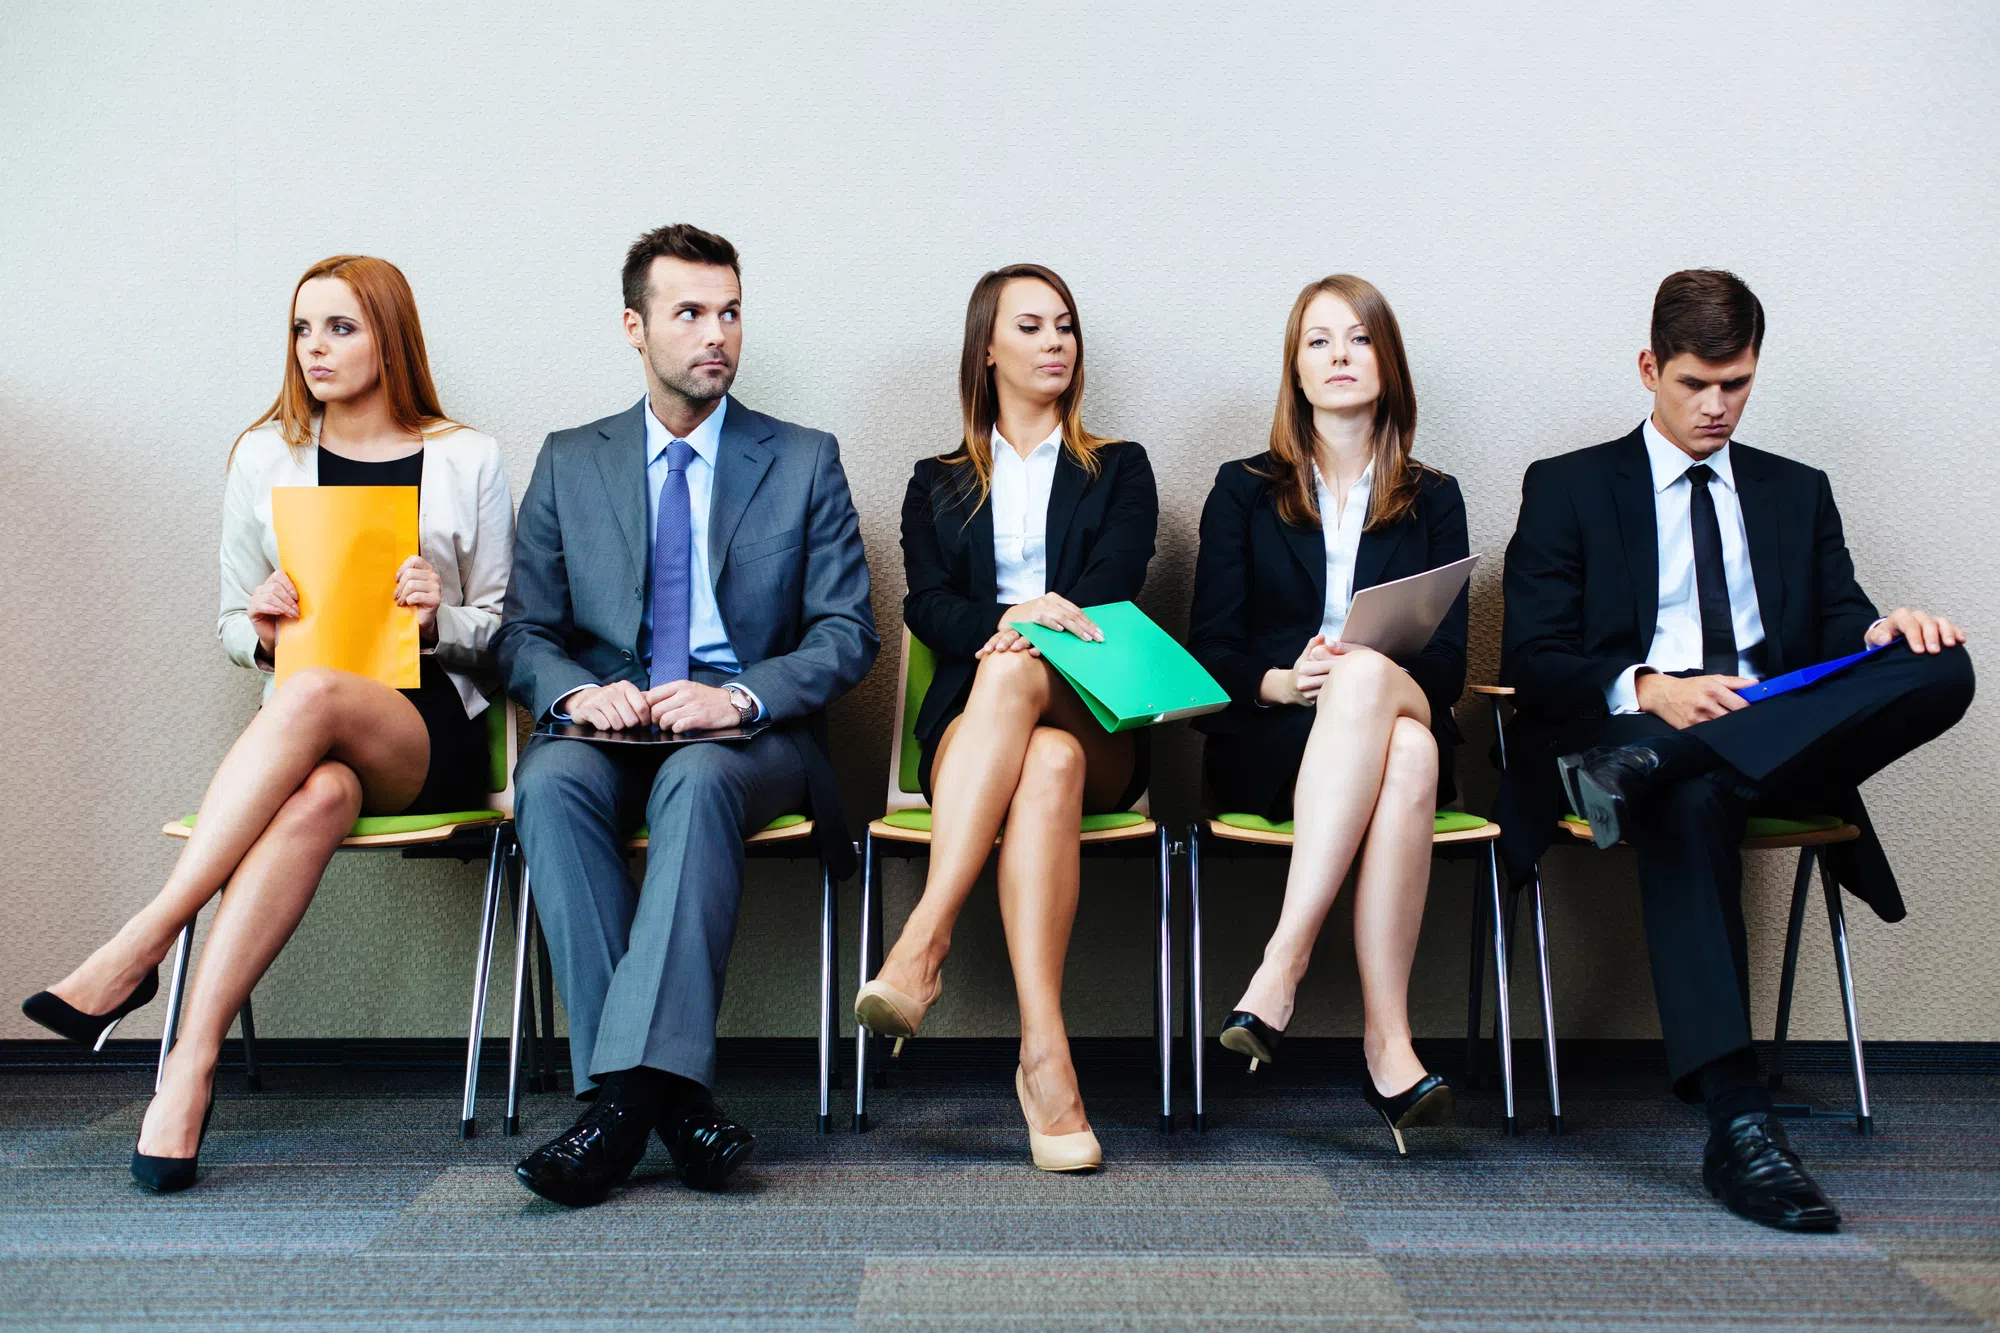 8 Surprising Ways You're Ruining Your Job Interview